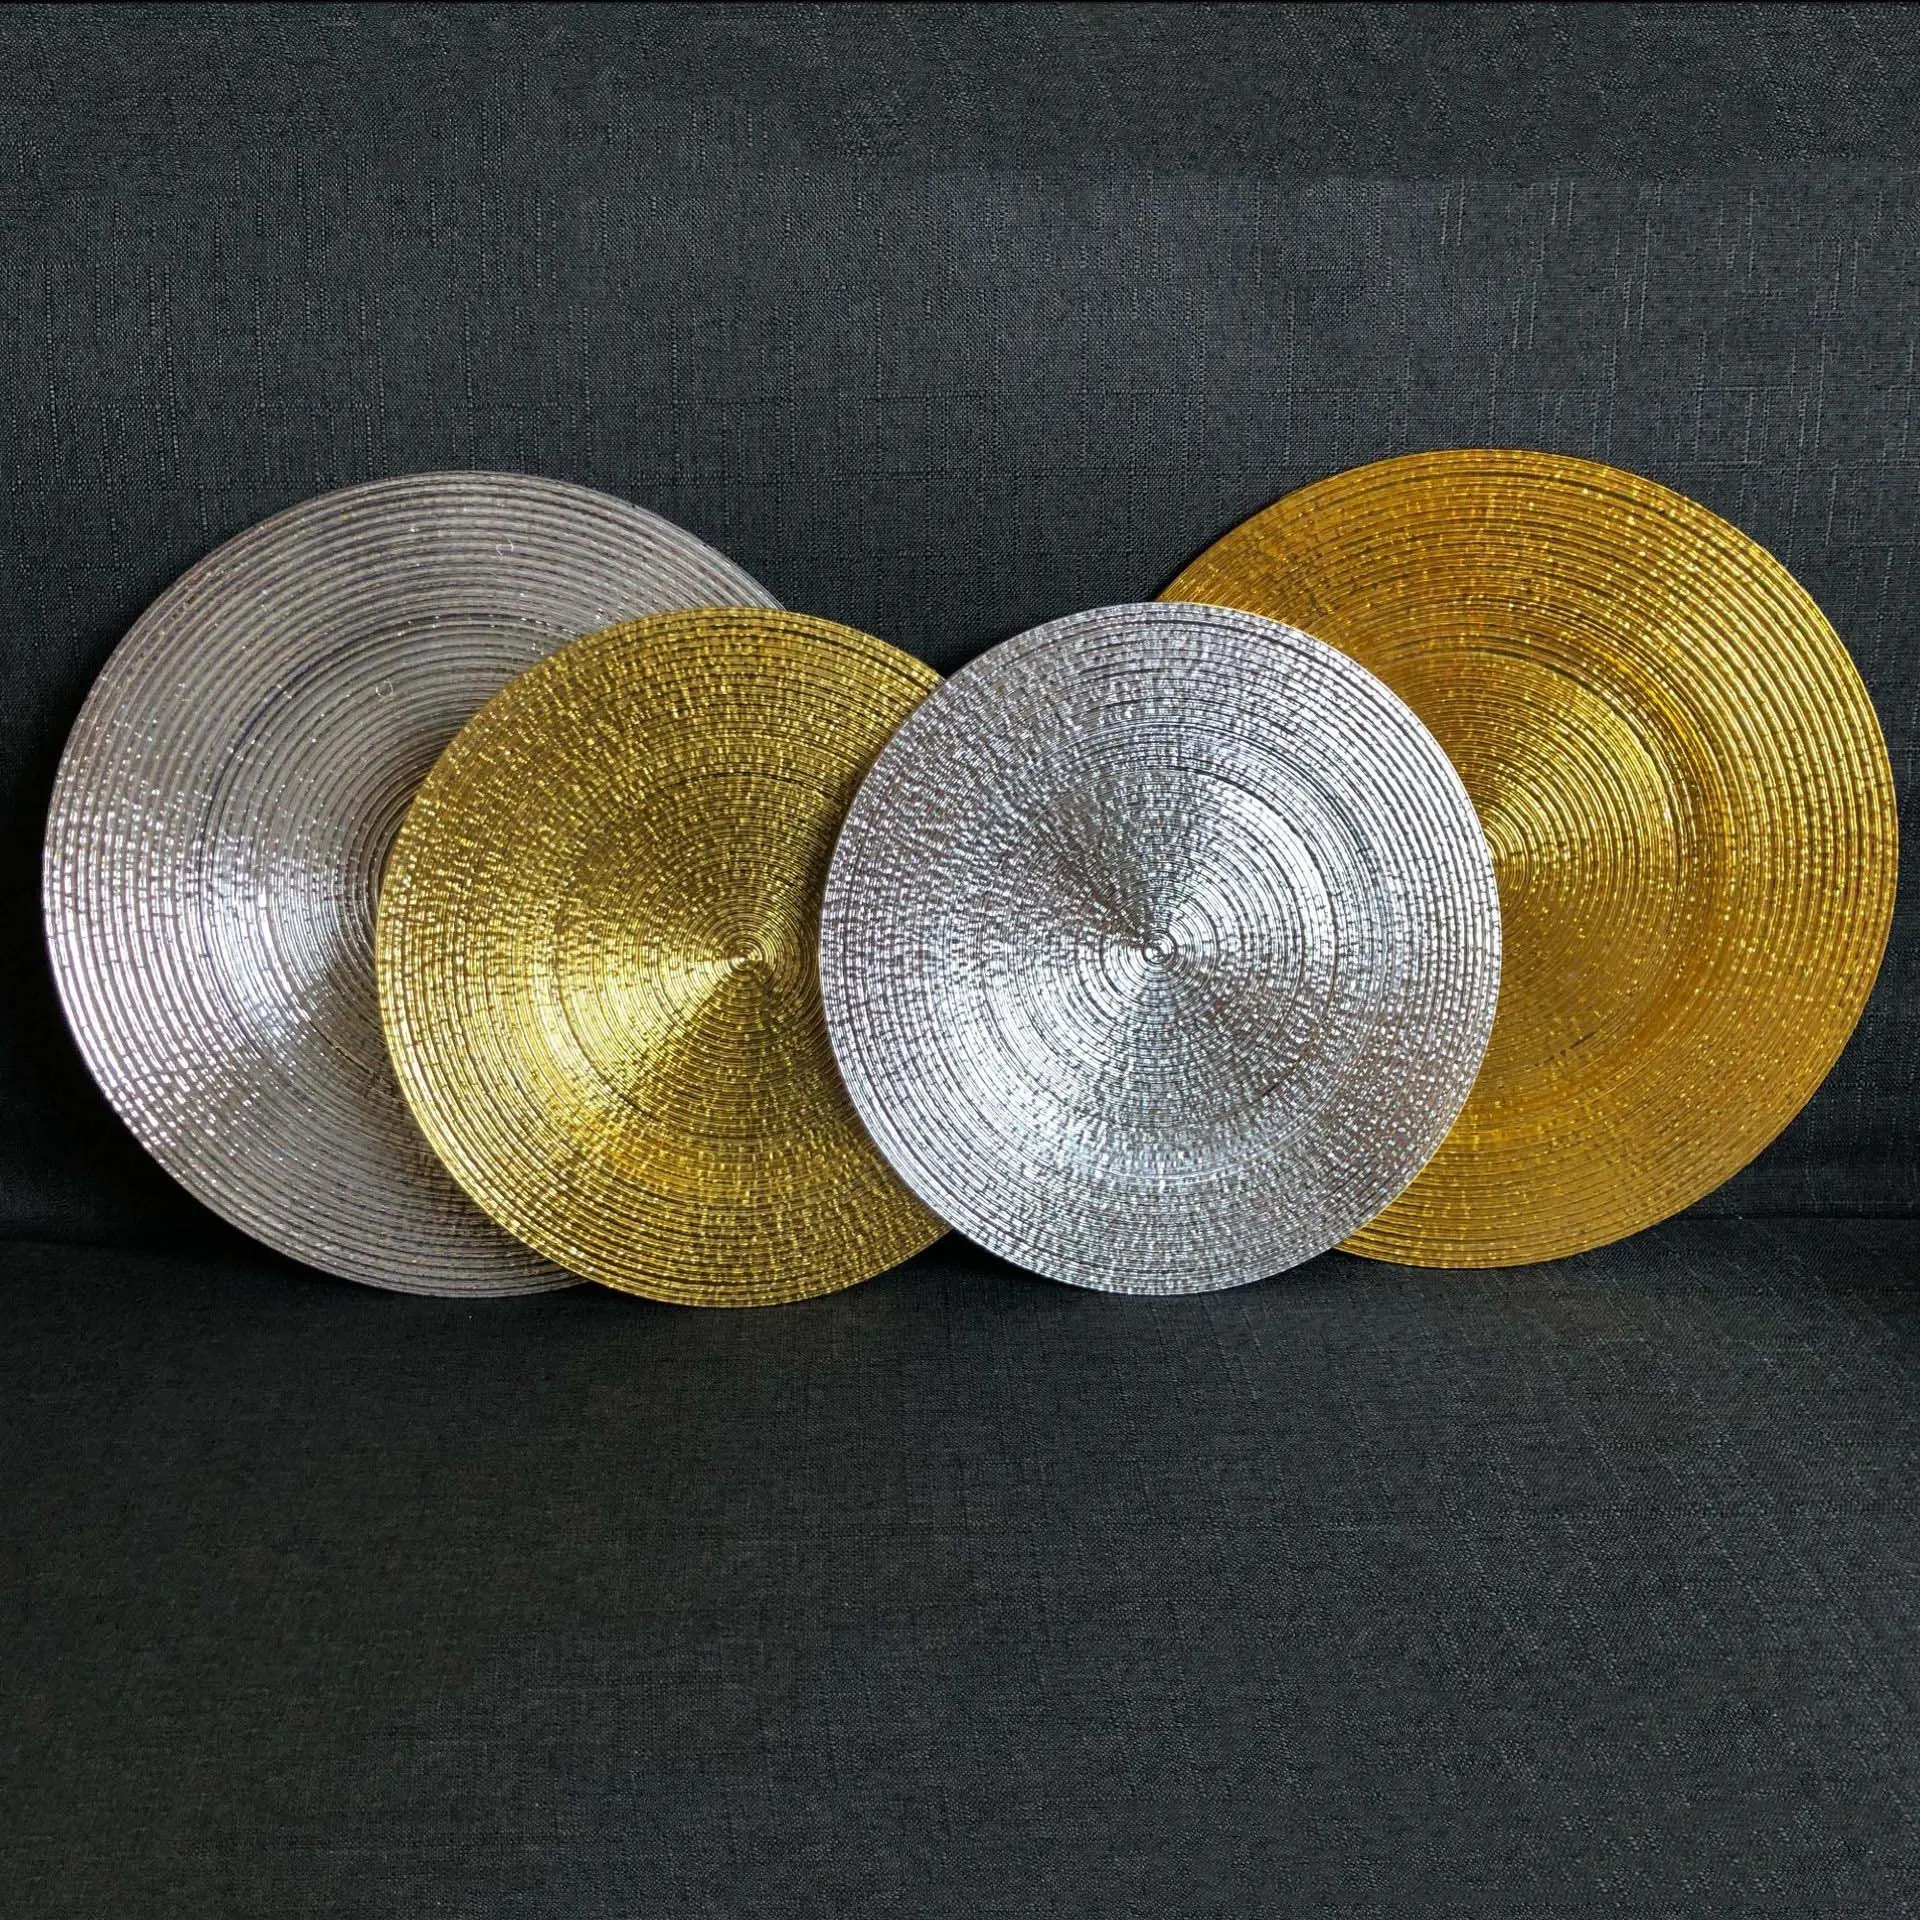 11/13" Luxury Elegance Gold Silver Transparent Reusable Record Pattern Plates Decorative Trays Fruit Dish Bowl Charger Plate